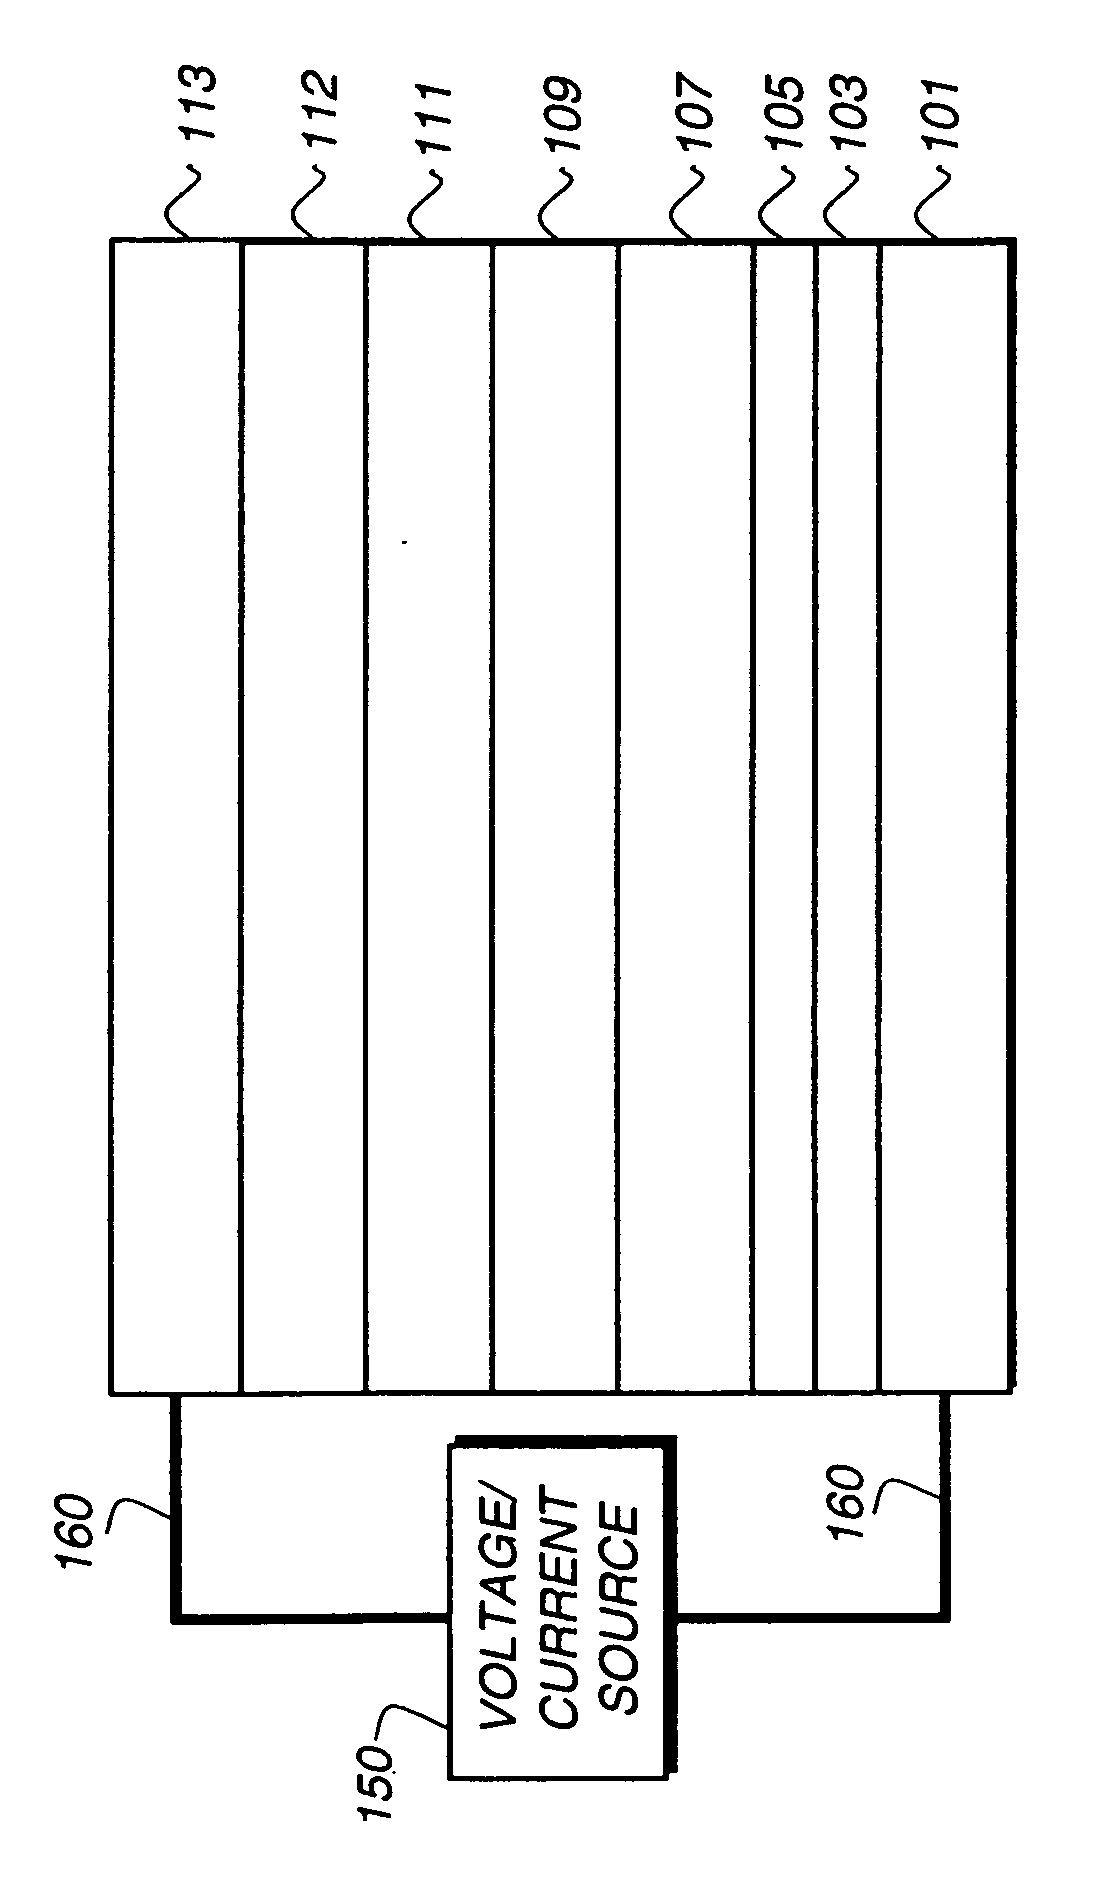 Electroluminescent device containing a butadiene derivative